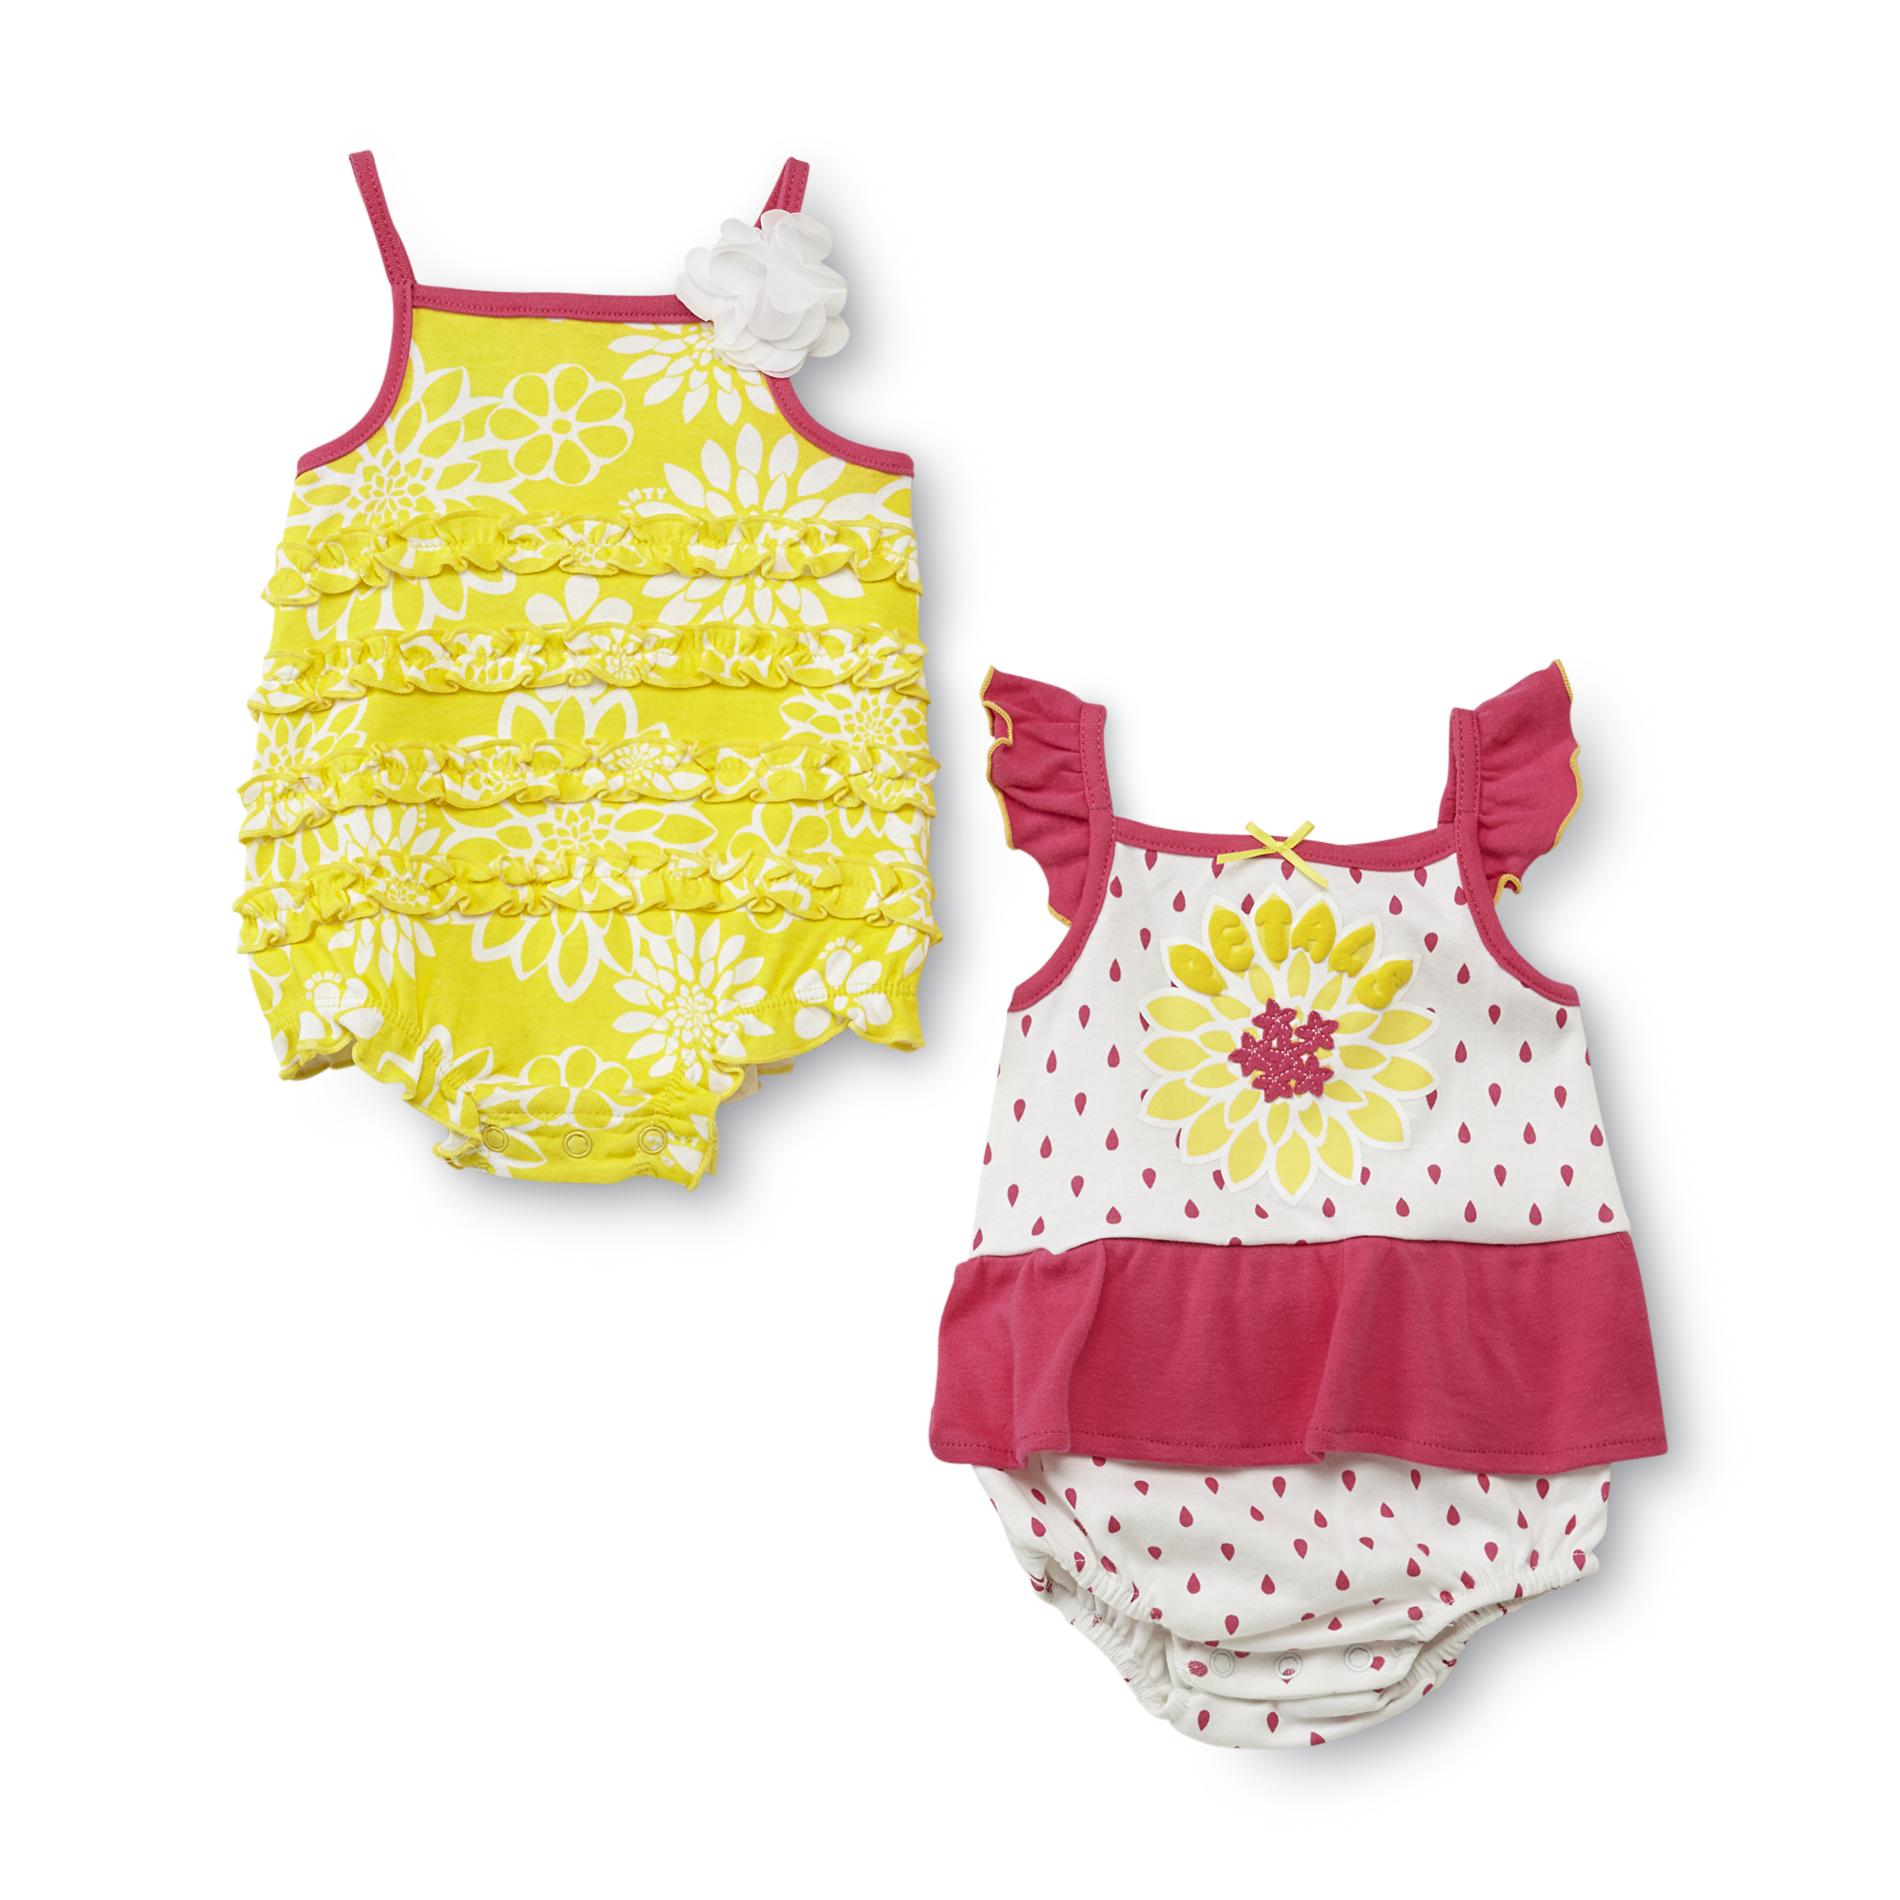 WATCH ME GROW Newborn Girl's 2-Pack Sleeveless Rompers - Floral